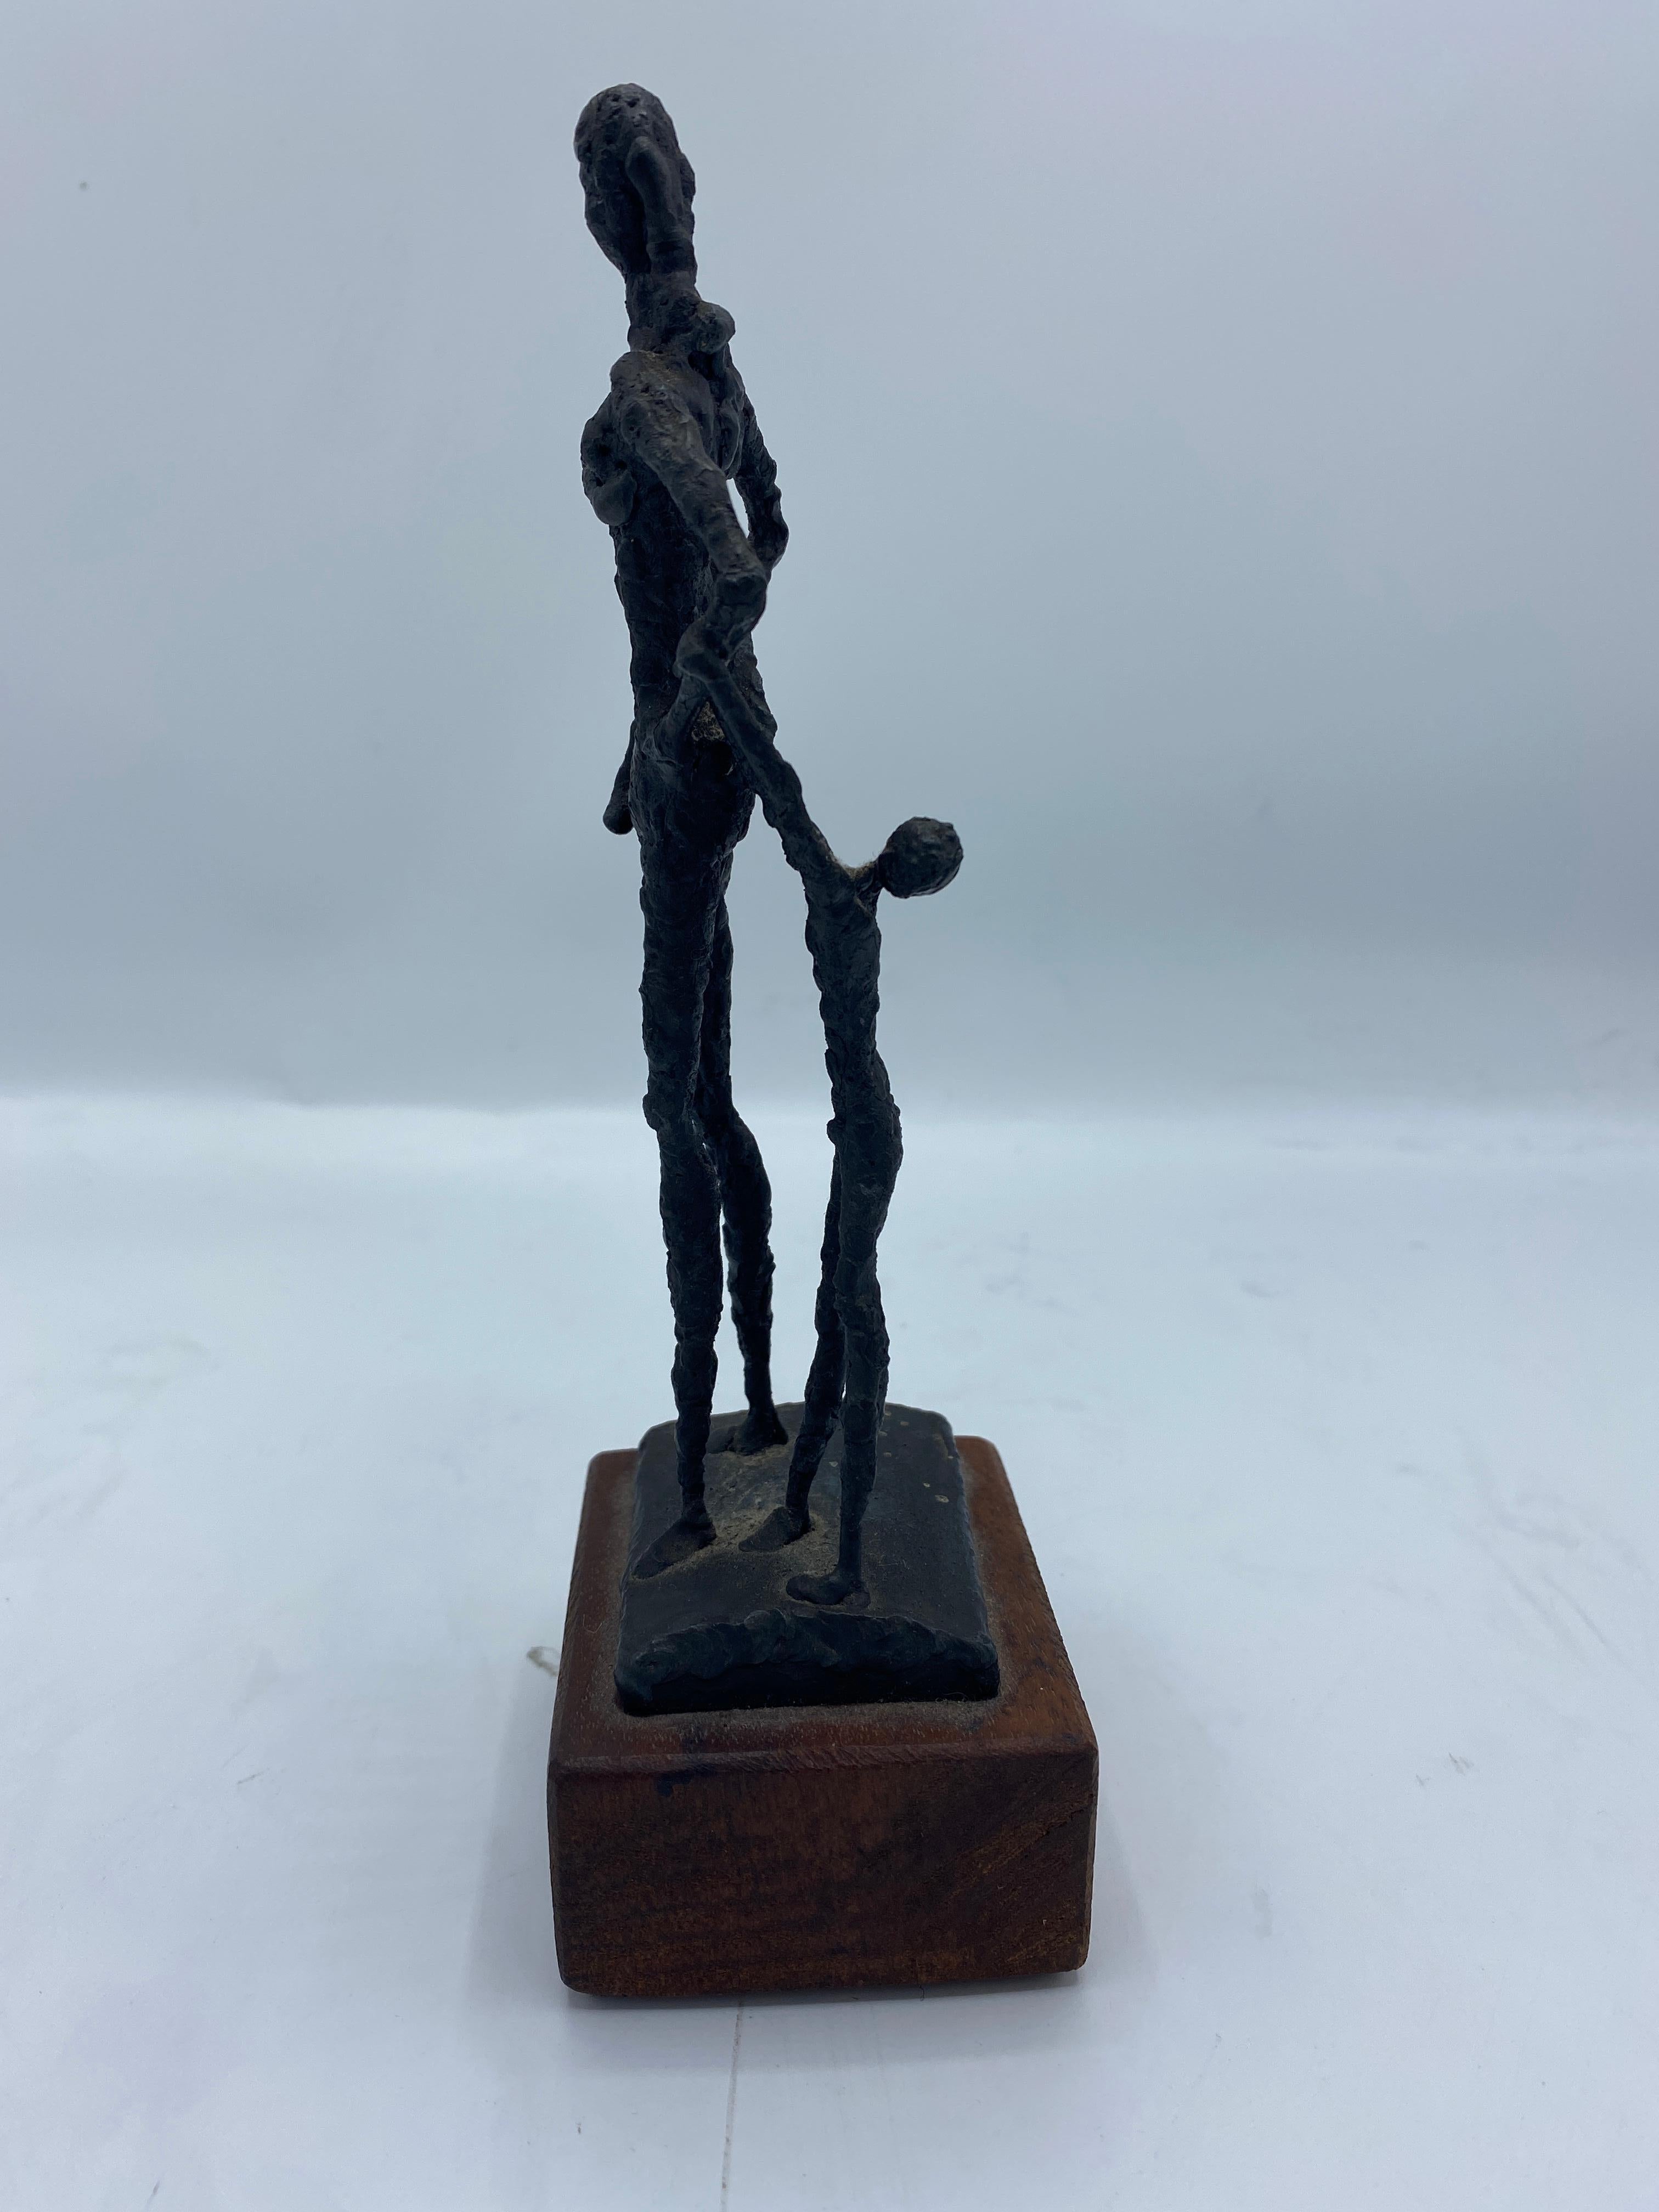 Small figurative metal mid 20th century sculpture by Harris Sorrelle
Metal tag underneath signed H. Sorrelle, dated '64' 
Measures: 8” H, 2.5” W, 2” D.